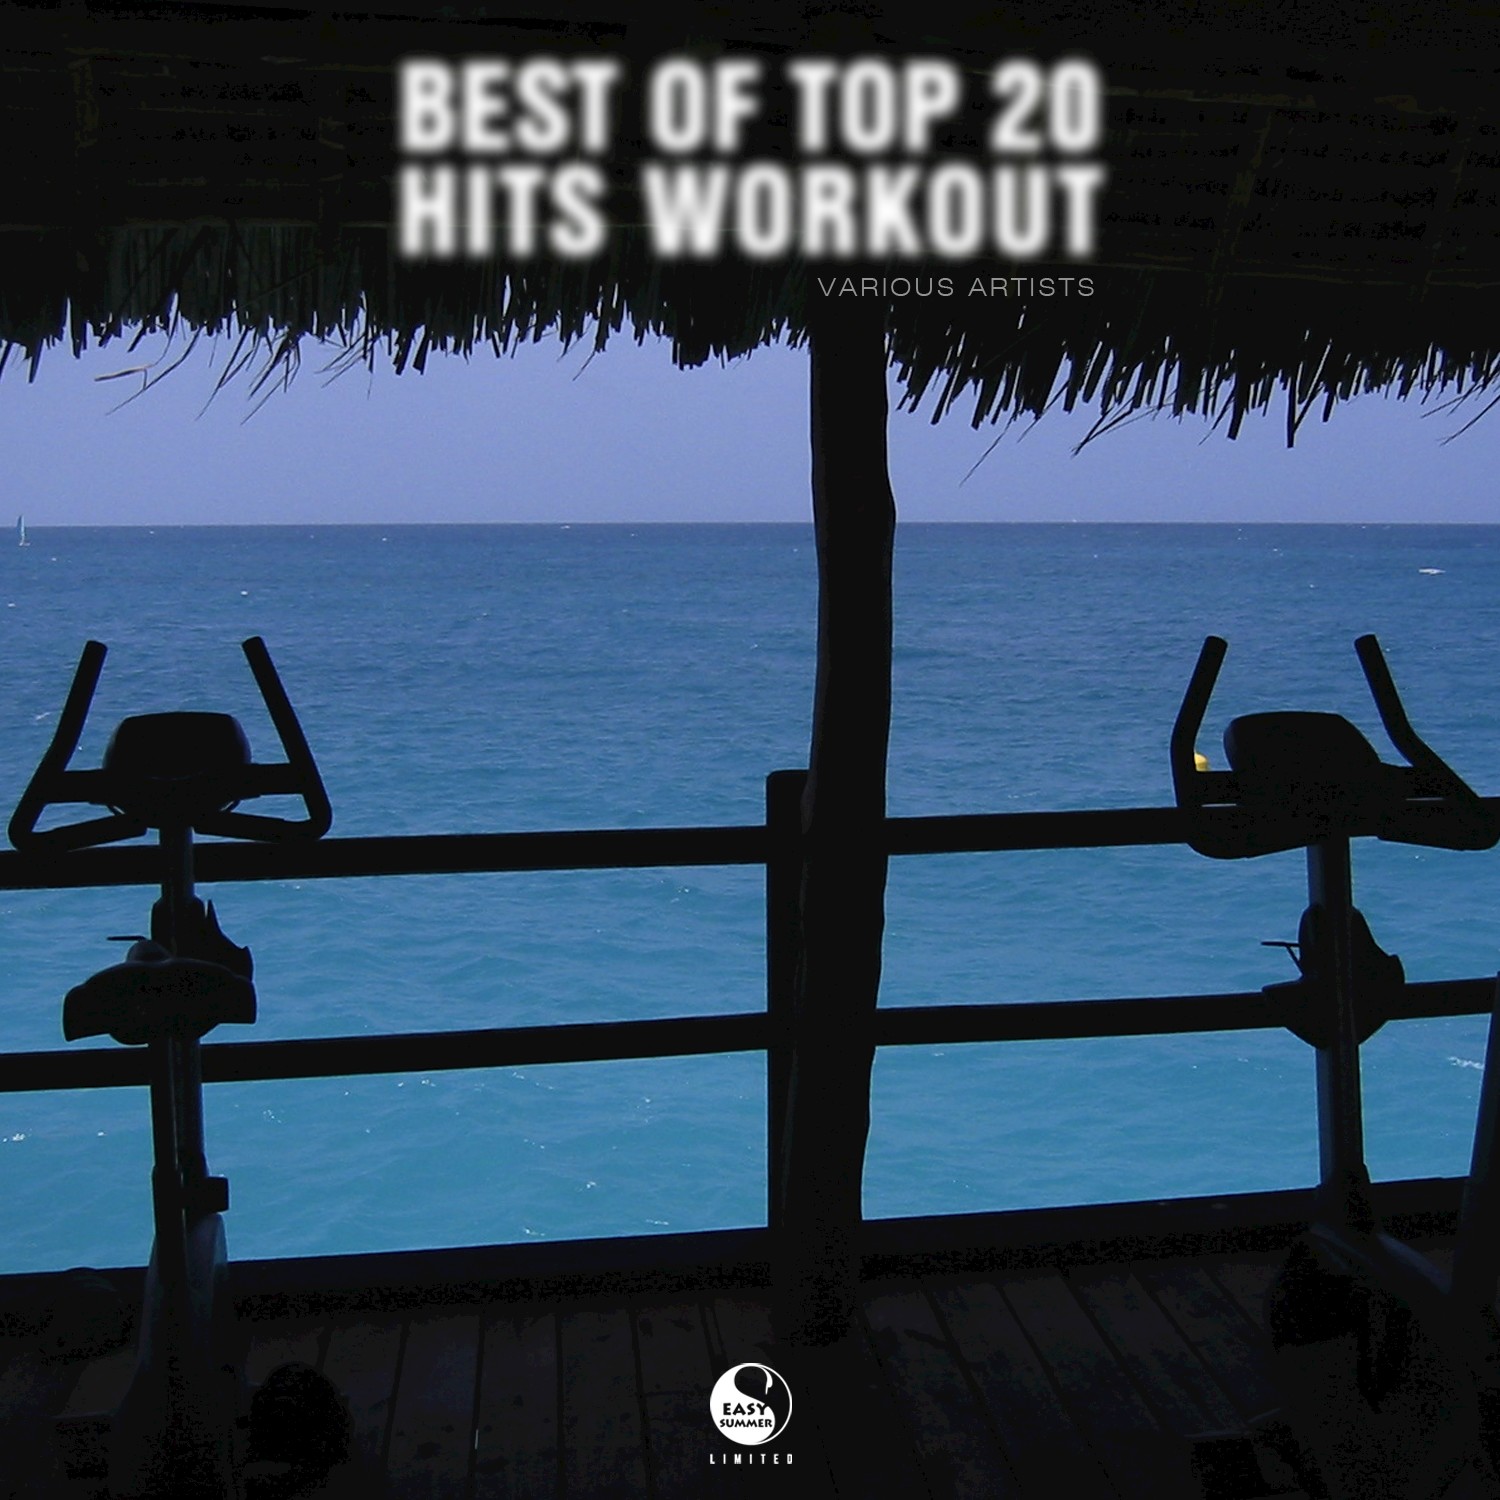 Best of 20 Top Hits Workout